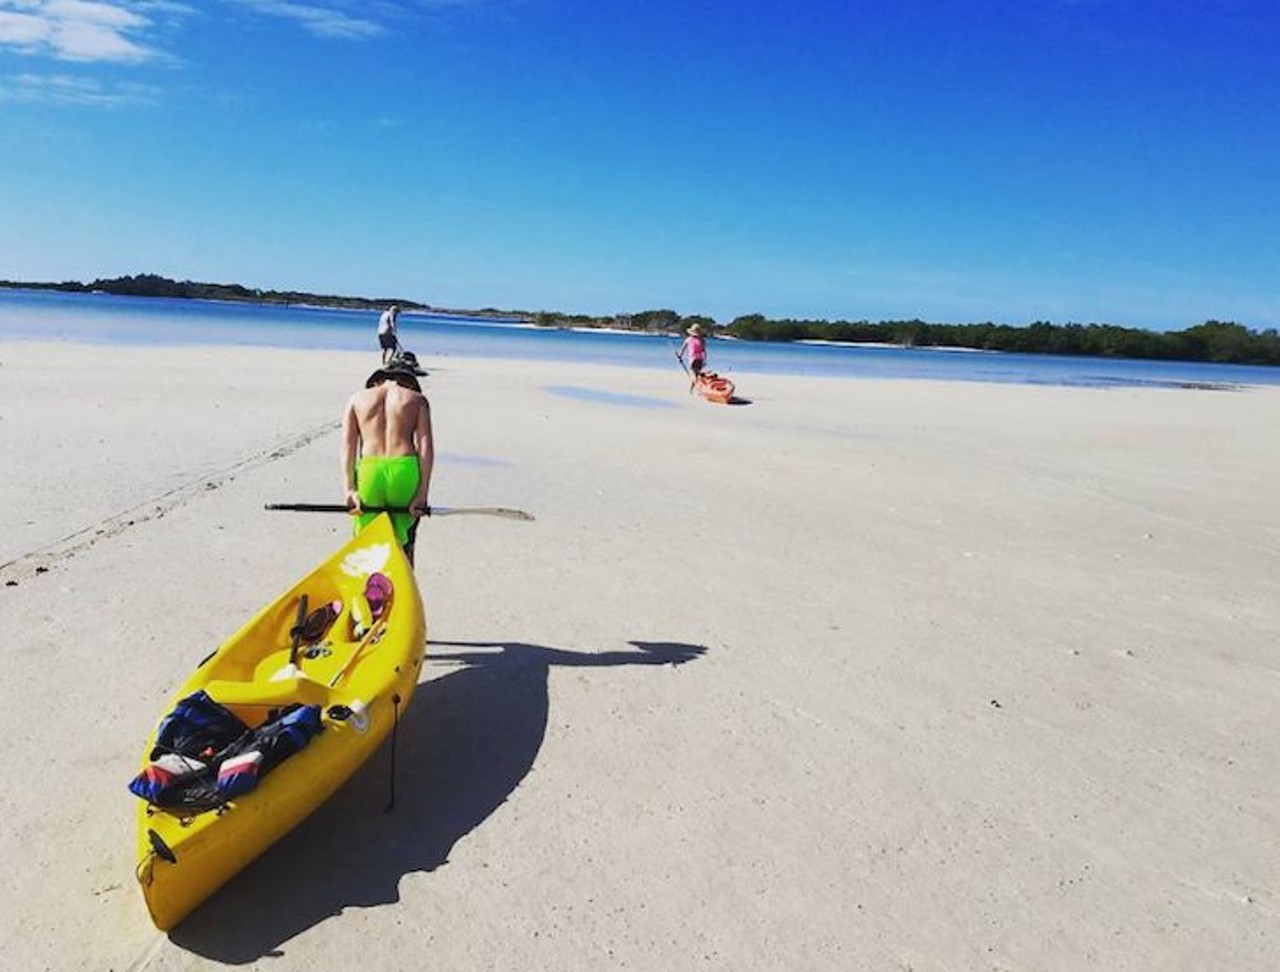 Fort De Soto
2 hours, 10 minutes away
Swim, kayak or spot a few dolphins along this diverse shore ecosystem. If you head over between April and September you might even spot some sea turtle nests: Loggerheads lay their eggs here during the summer. 
Photo via drewstacey5/Instagram